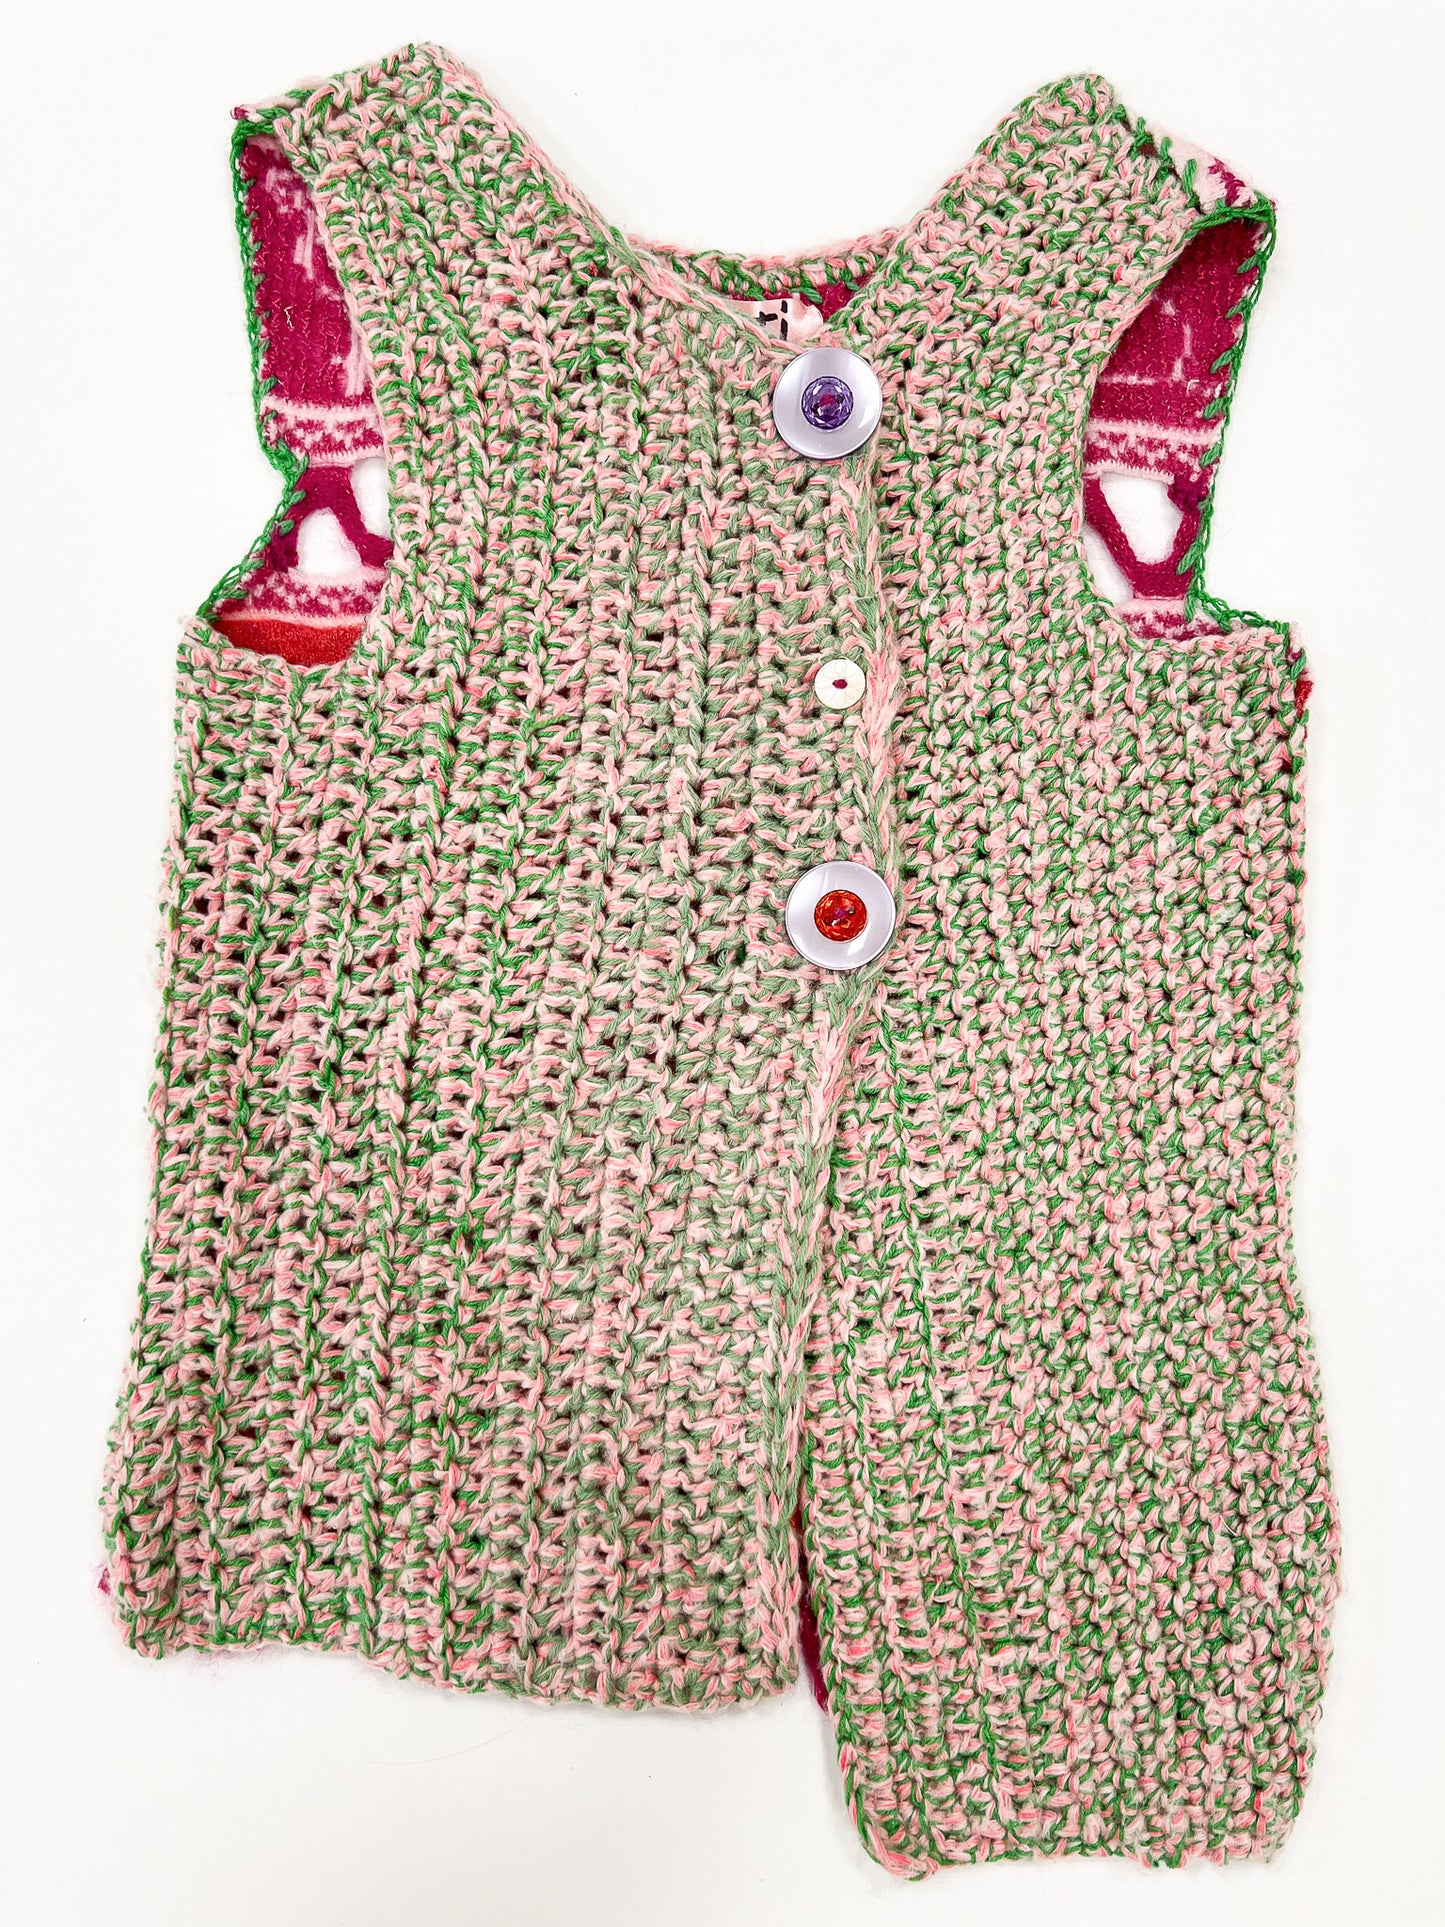 "Peeing girls" up-cycled vest